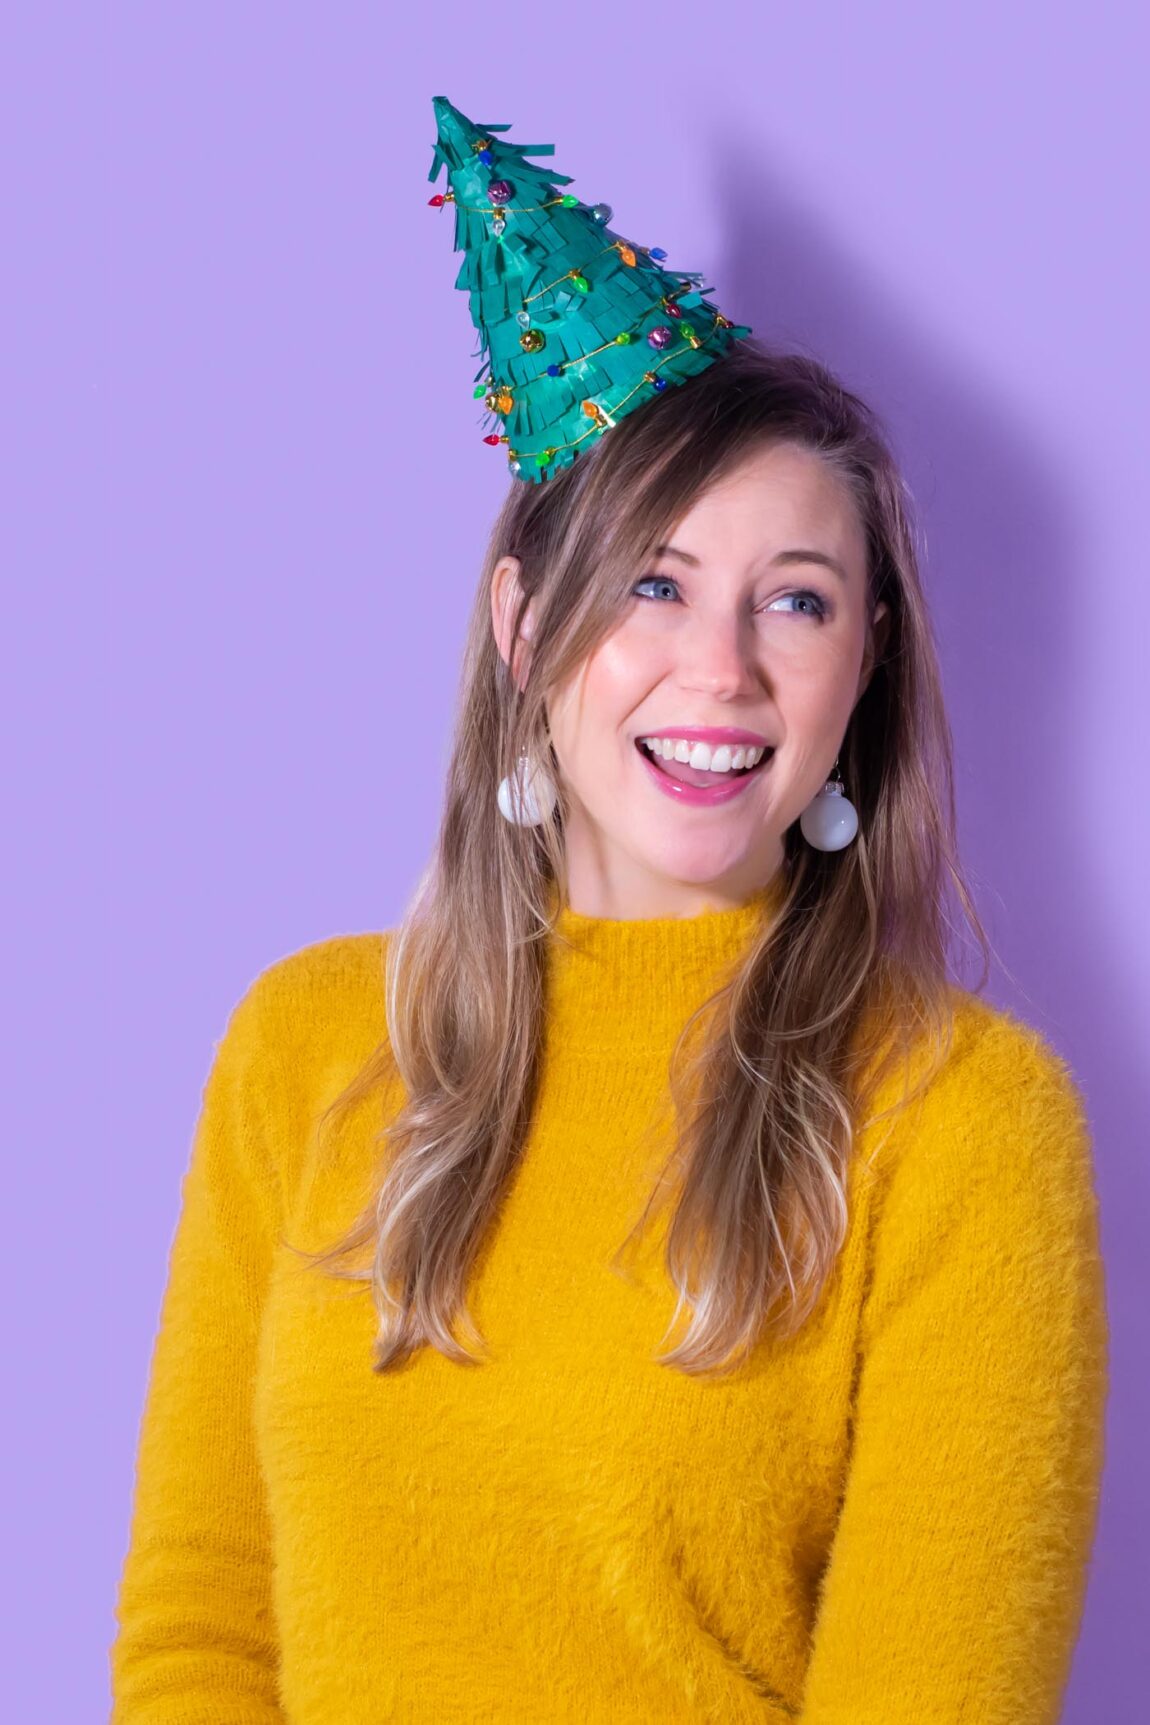 DIY Christmas Tree Party Hats // Turn a plain party hat into a fun holiday craft with tissue paper! Upcycle your hats into fringed Christmas trees decorated with lights and ornaments! #christmas #christmasdiy #christmascrafts #partydiy #partyideas #holidayparty #christmasparty #partyhats